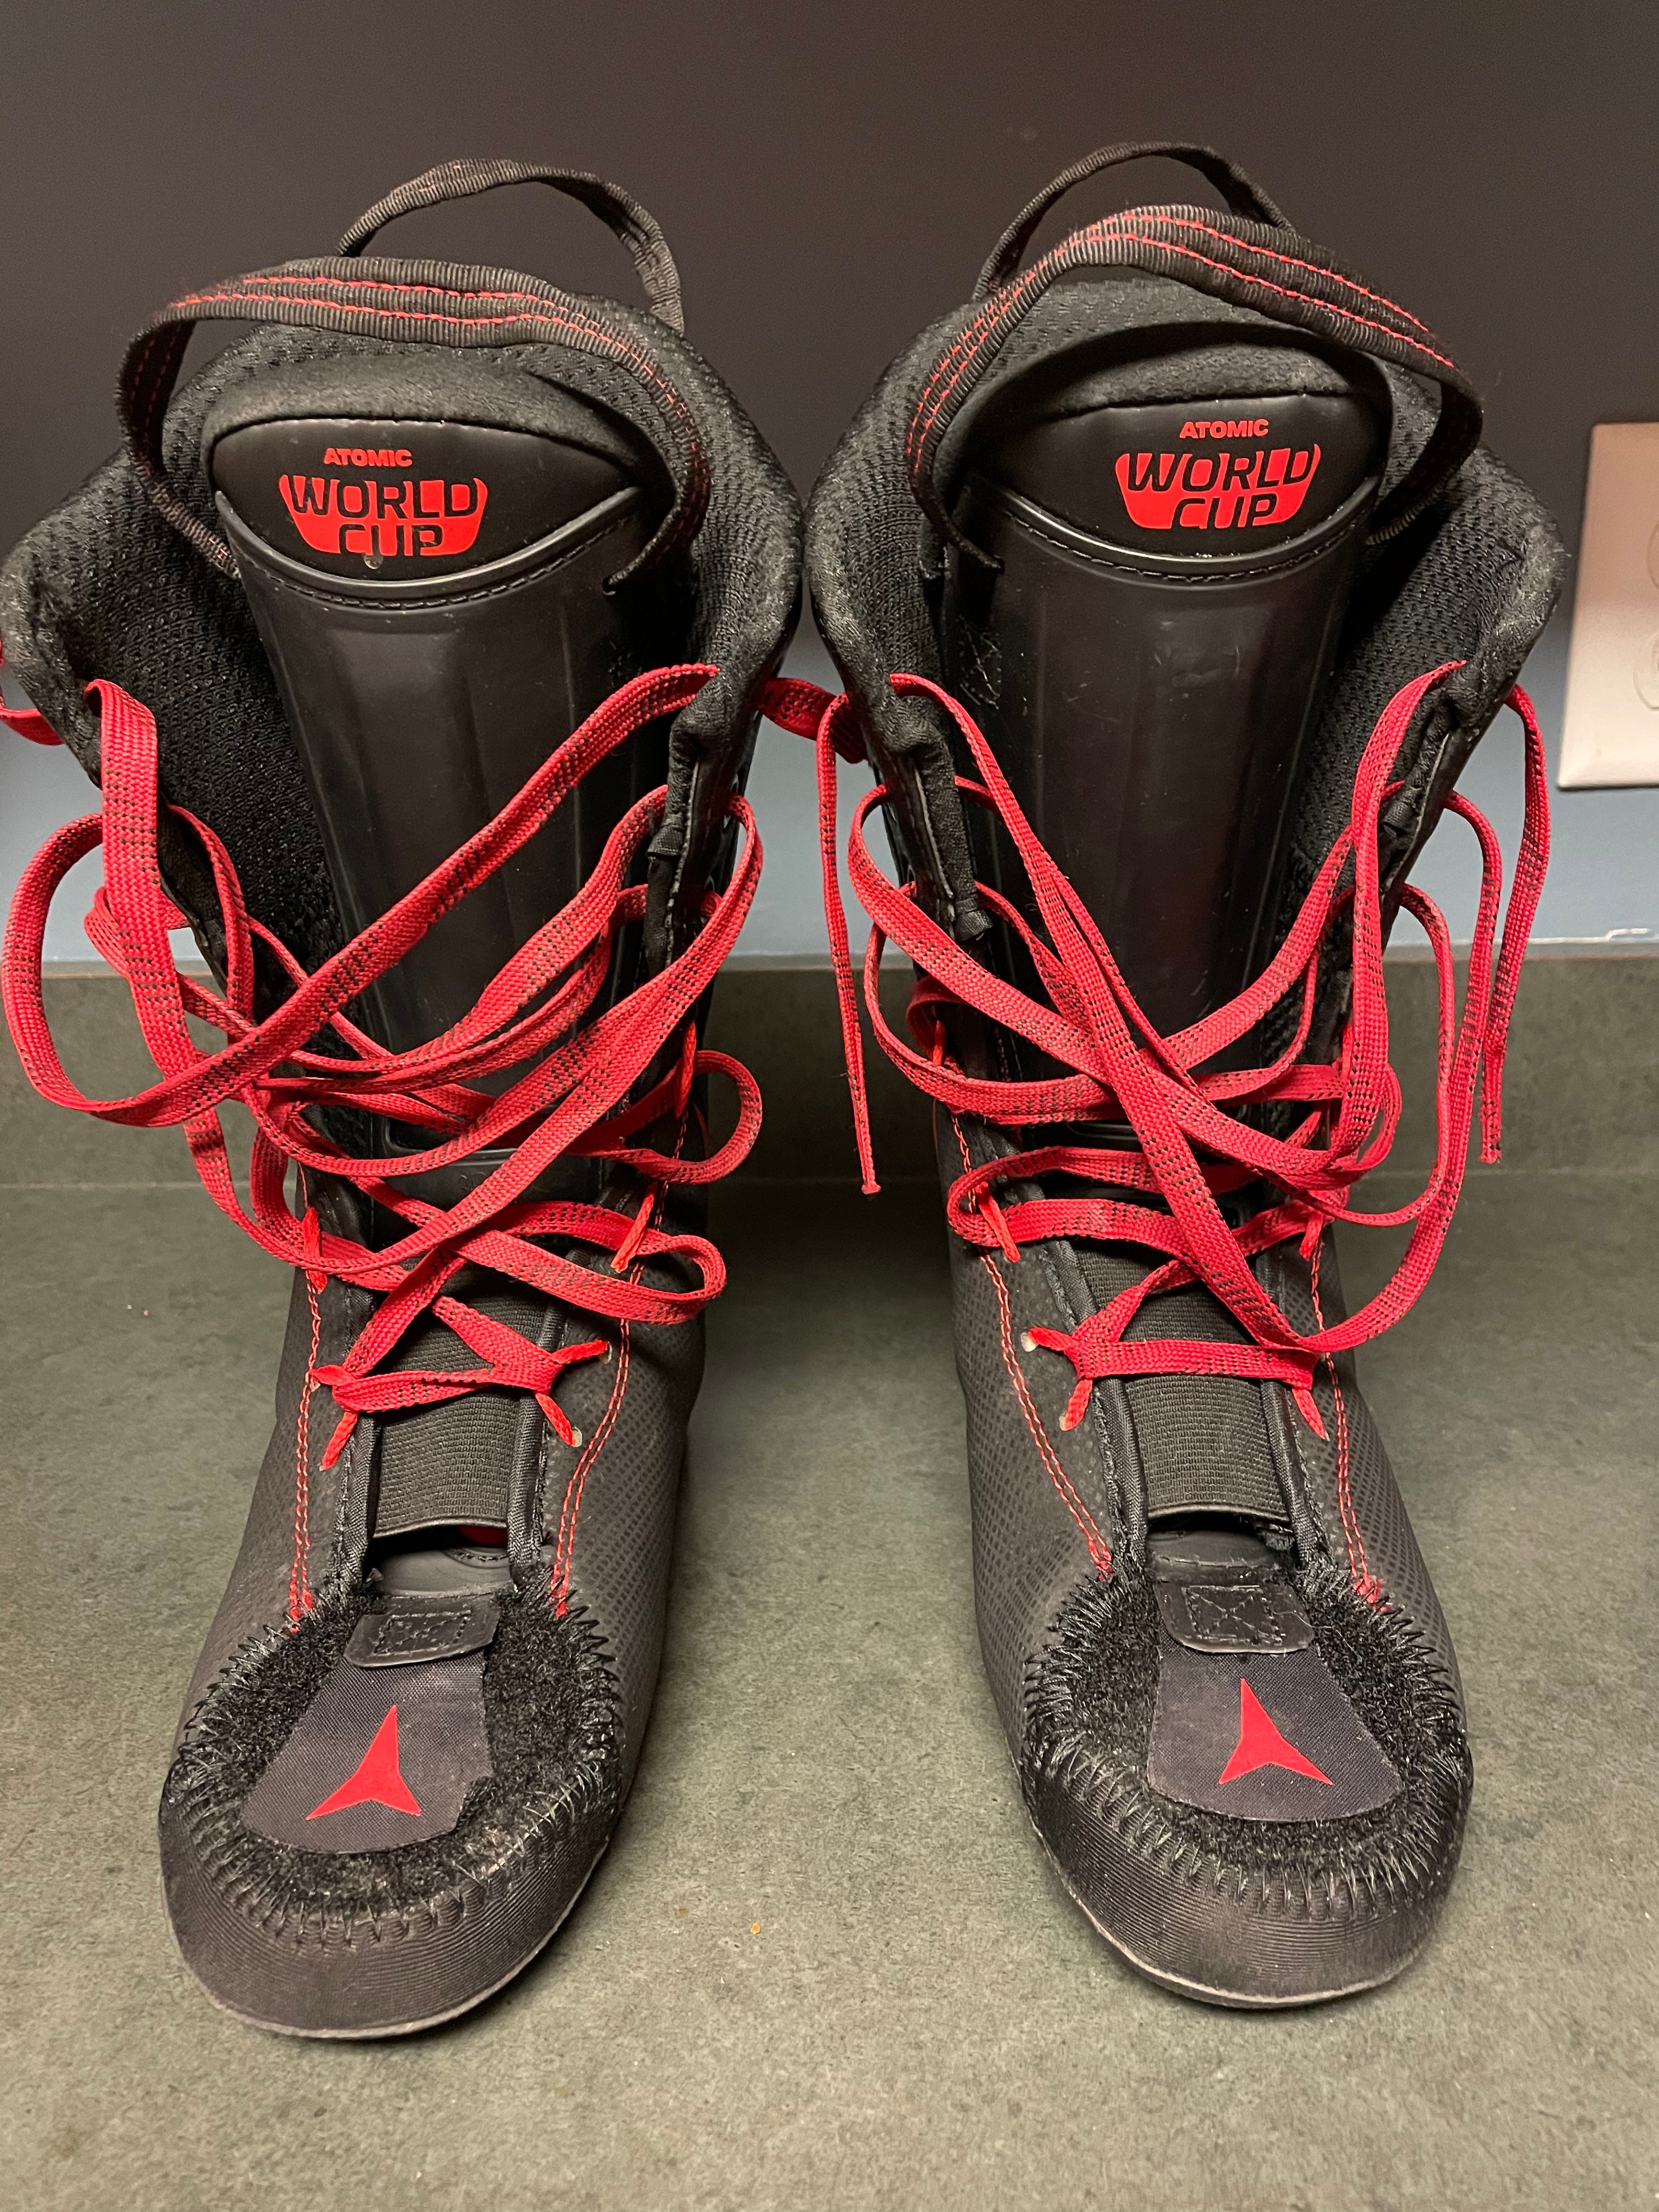 Atomic Redster WC 150 Ski Boots | SidelineSwap